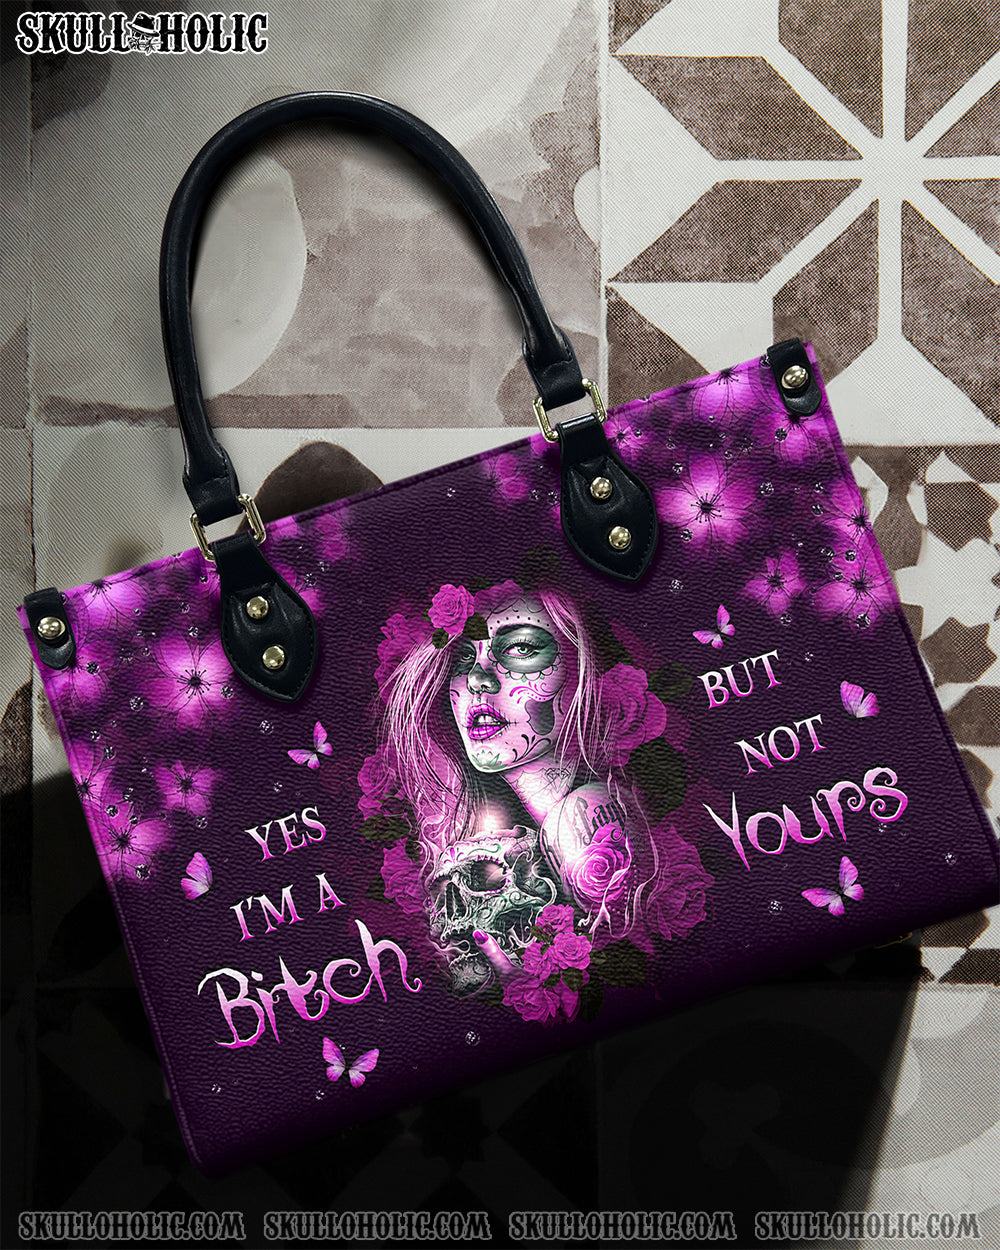 YES I'M A B BUT NOT YOURS LEATHER HANDBAG - YHKD2703242